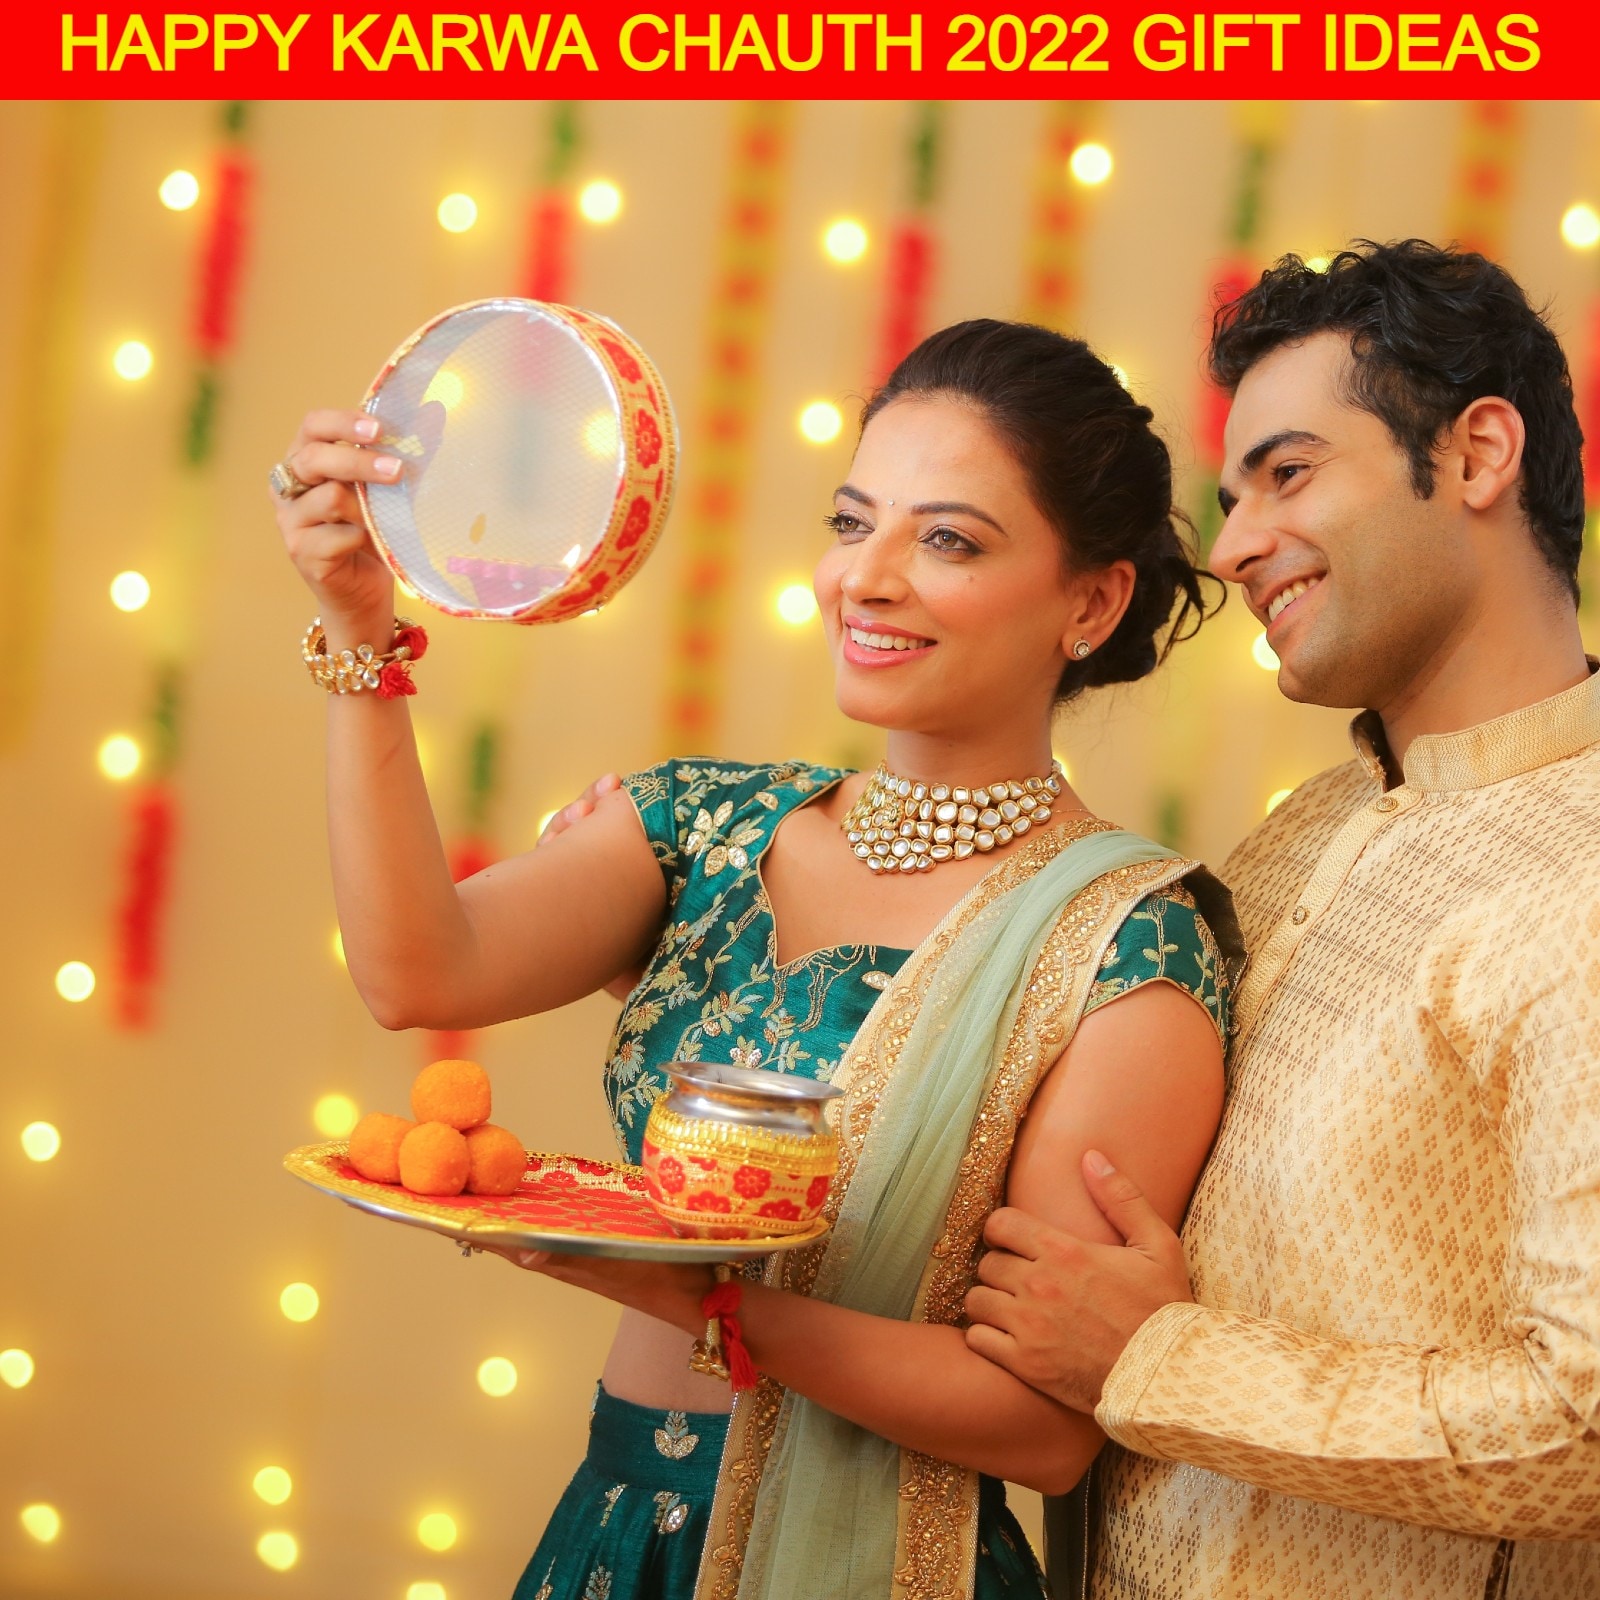 5 Best Suggestions of Karwa Chauth Gifts for Mother-in-Law - GiftaLove Blog